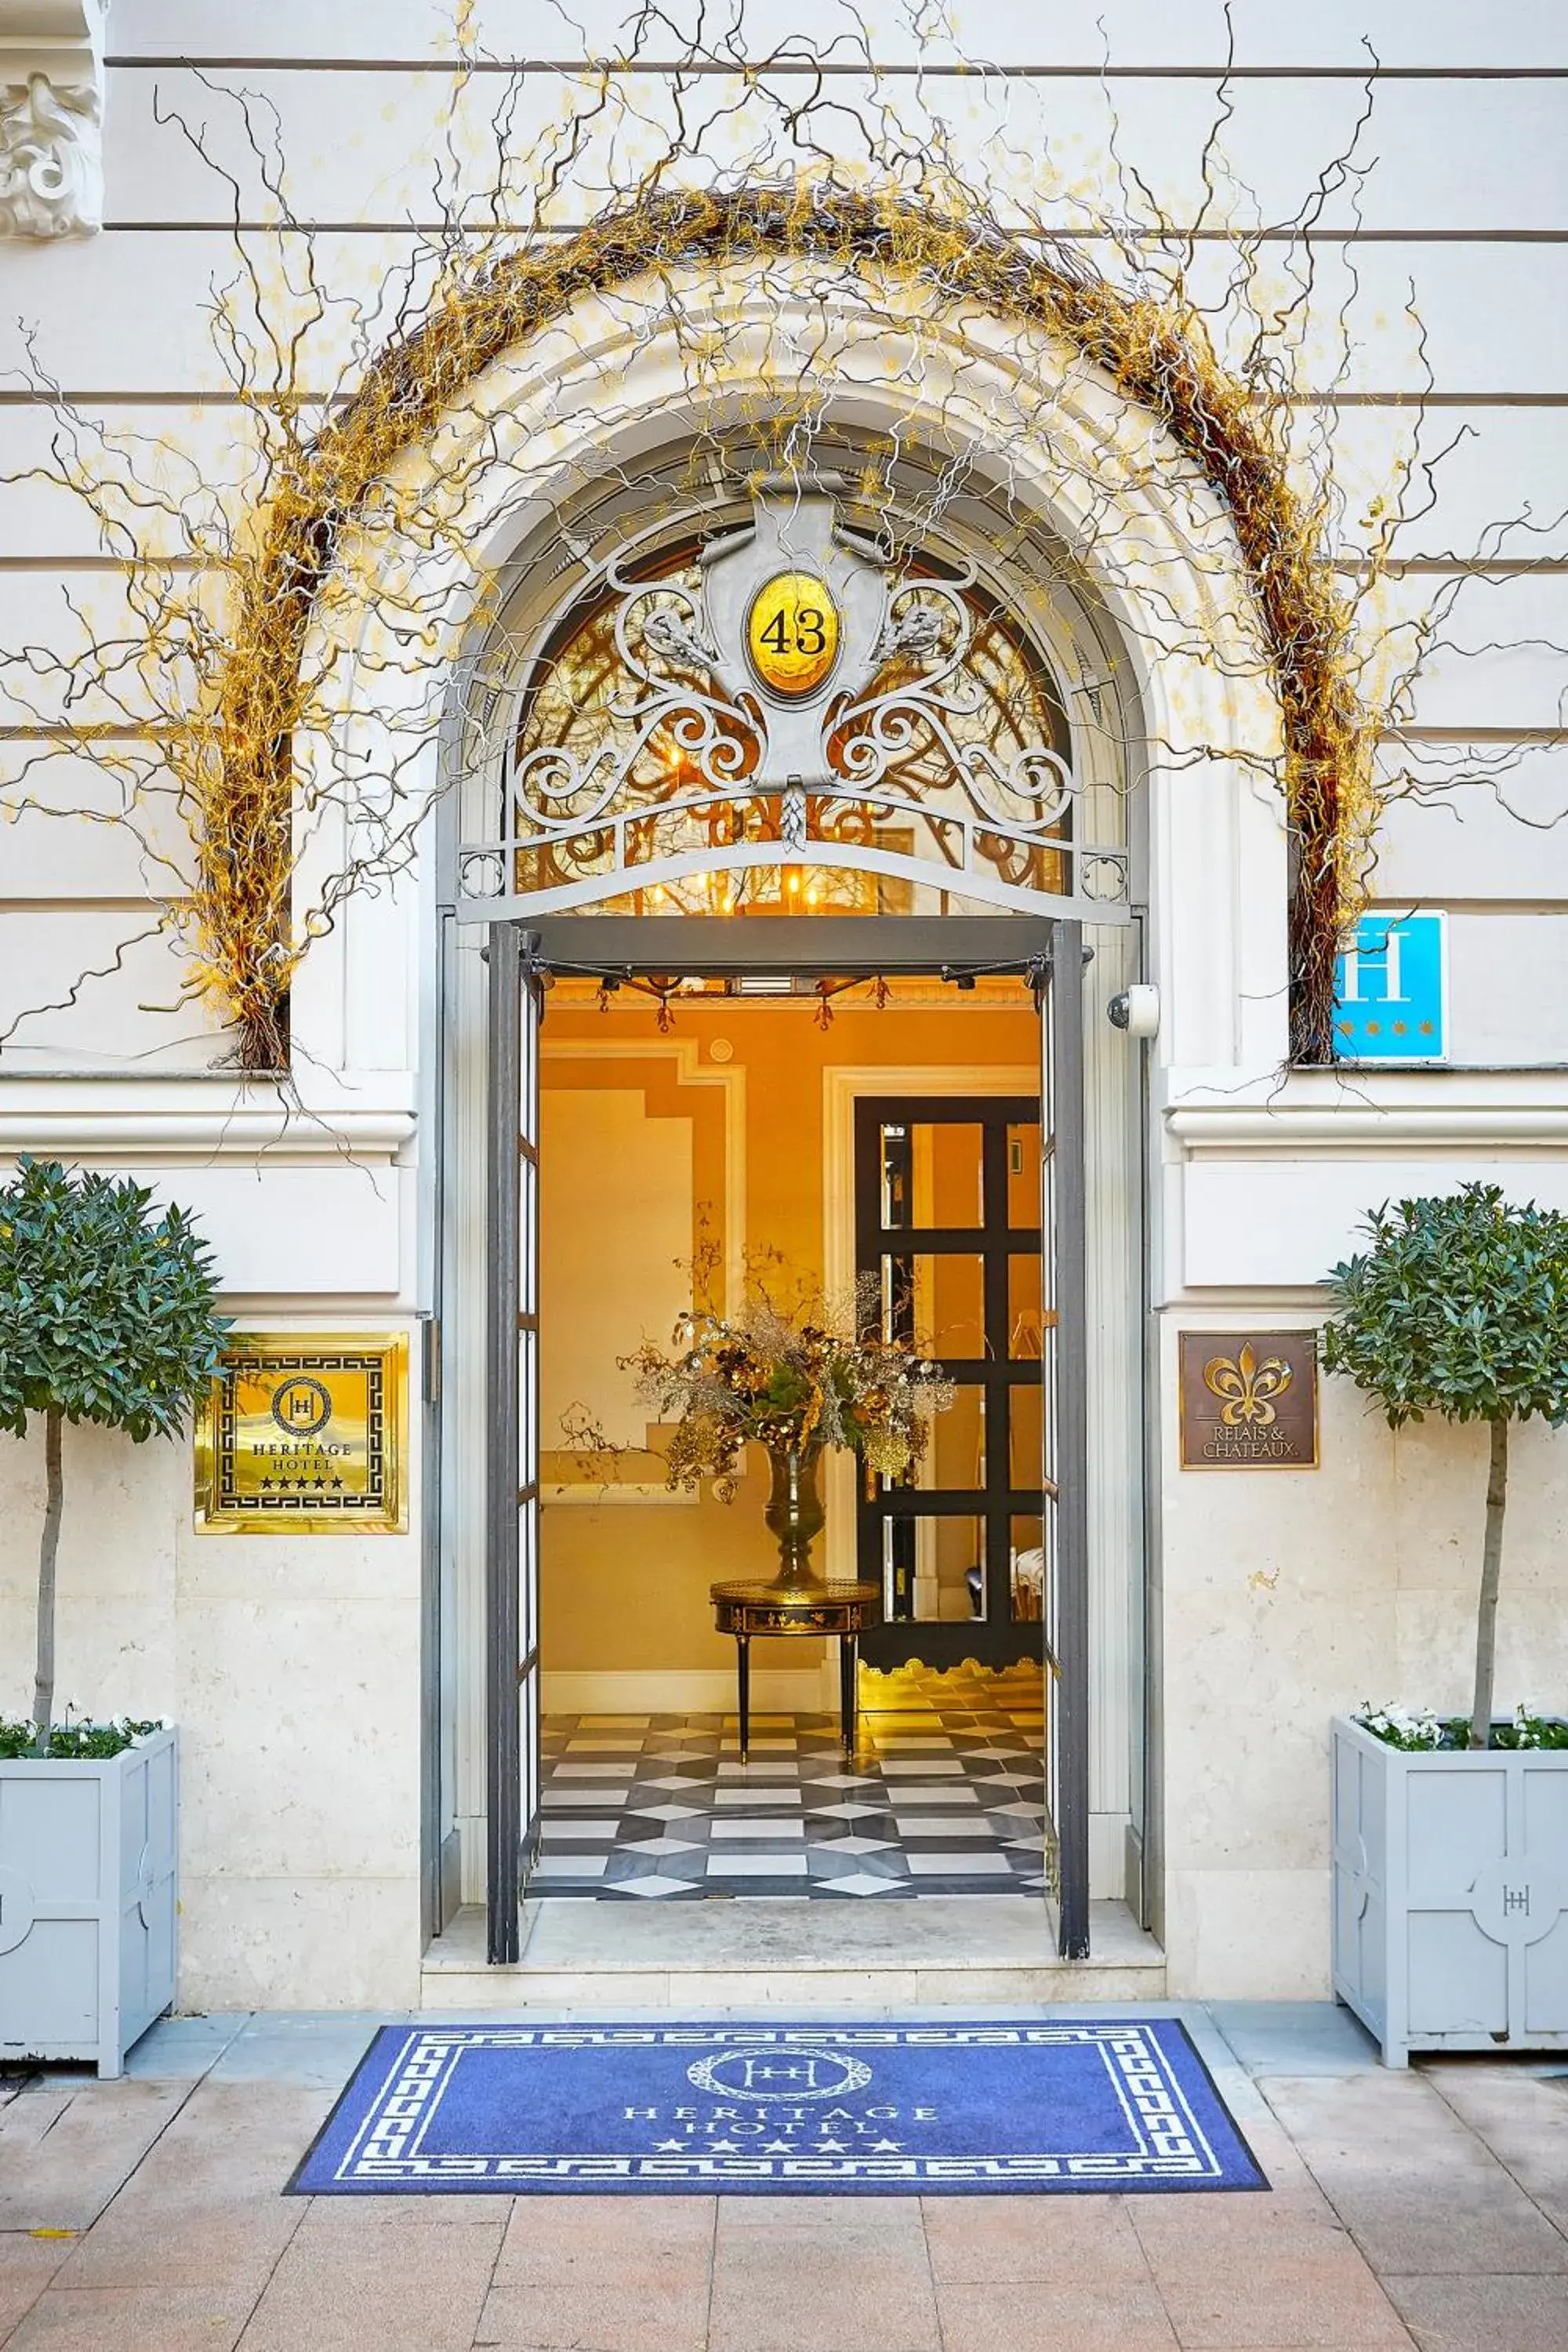 Property building in Relais & Châteaux Heritage Hotel